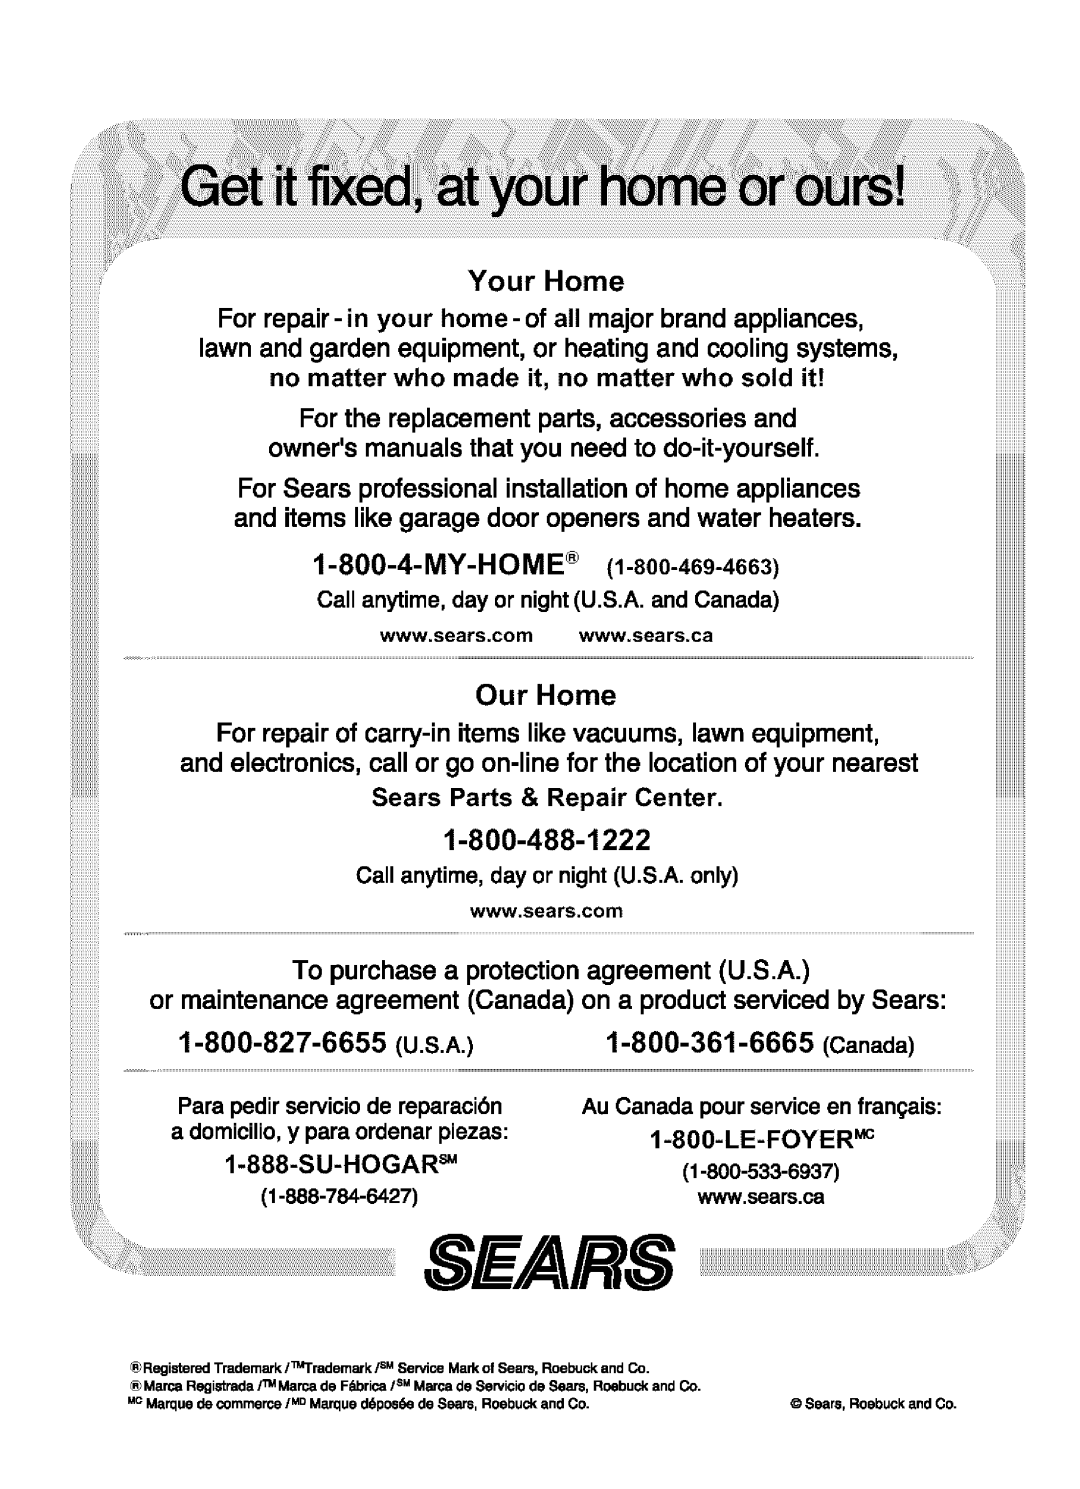 Kenmore 721.64684 Your Home, Sears Parts & Repair Center, To purchase a protectionagreement U.S.A, 1-800-827-6655, Canada 